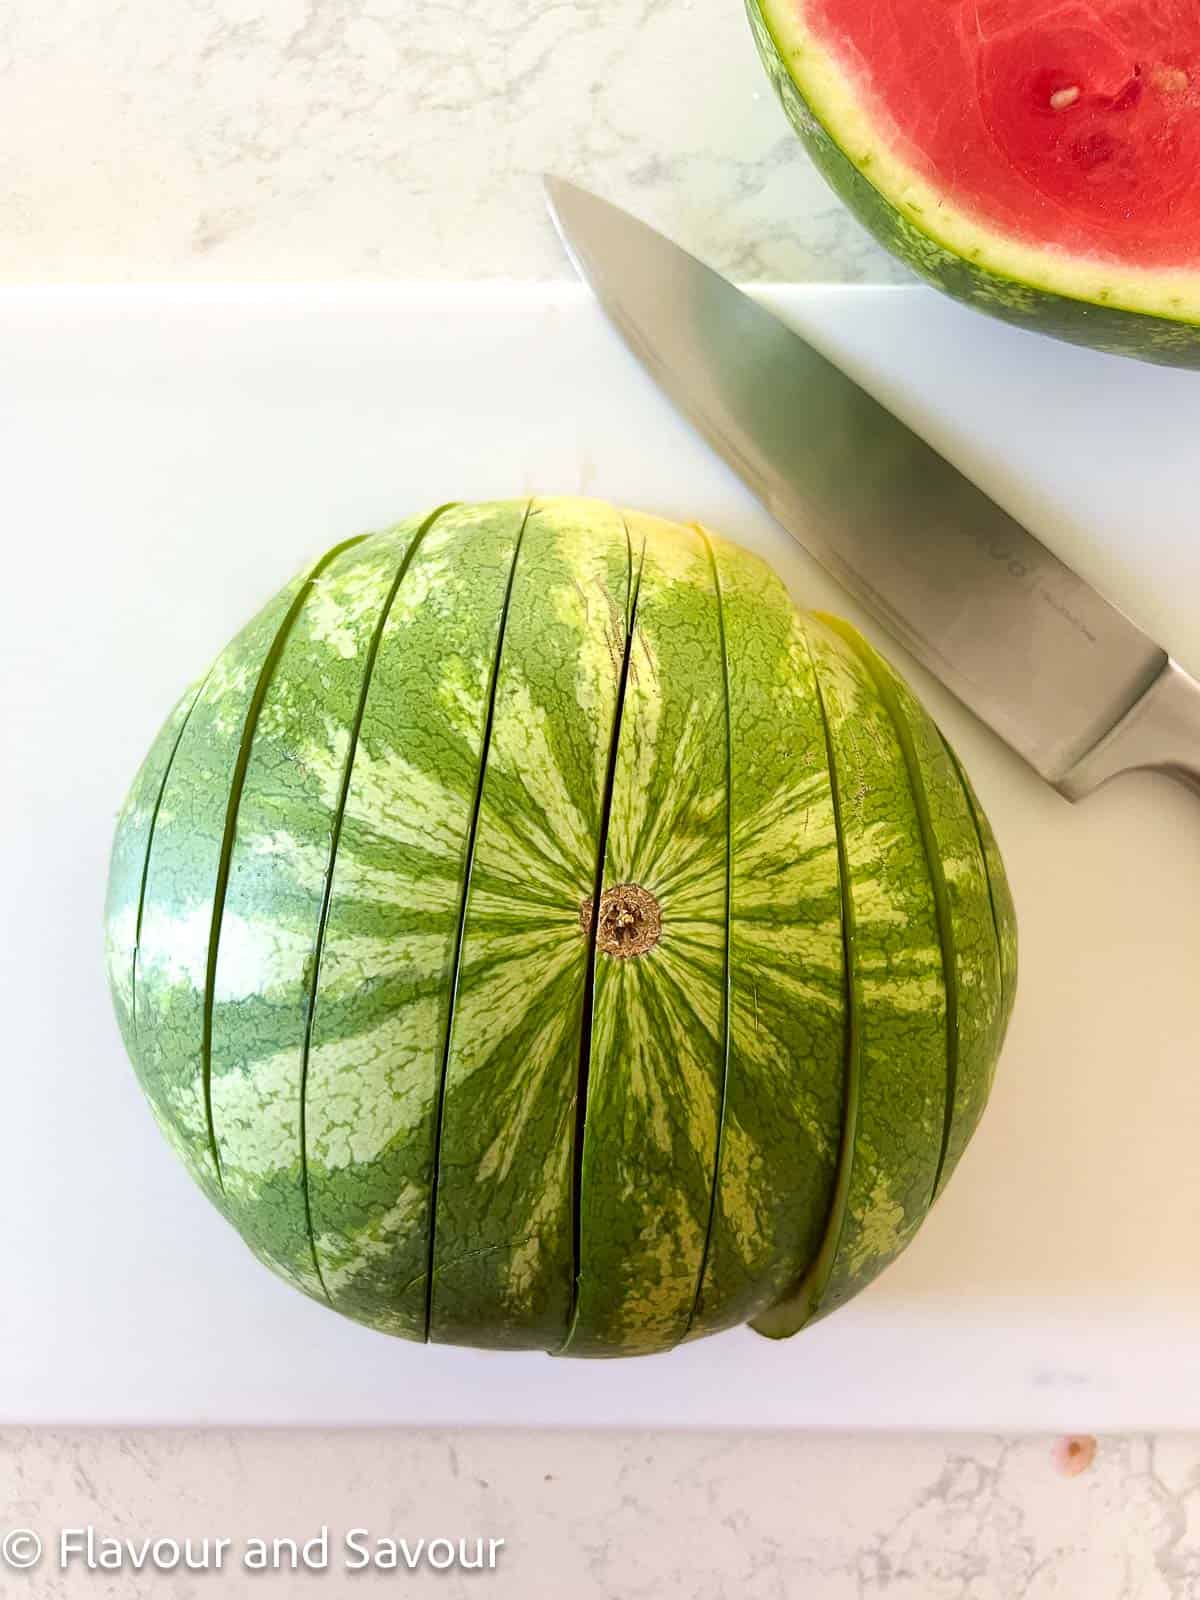 Half a watermelon, cut side down, sliced in ¾ inch slices.